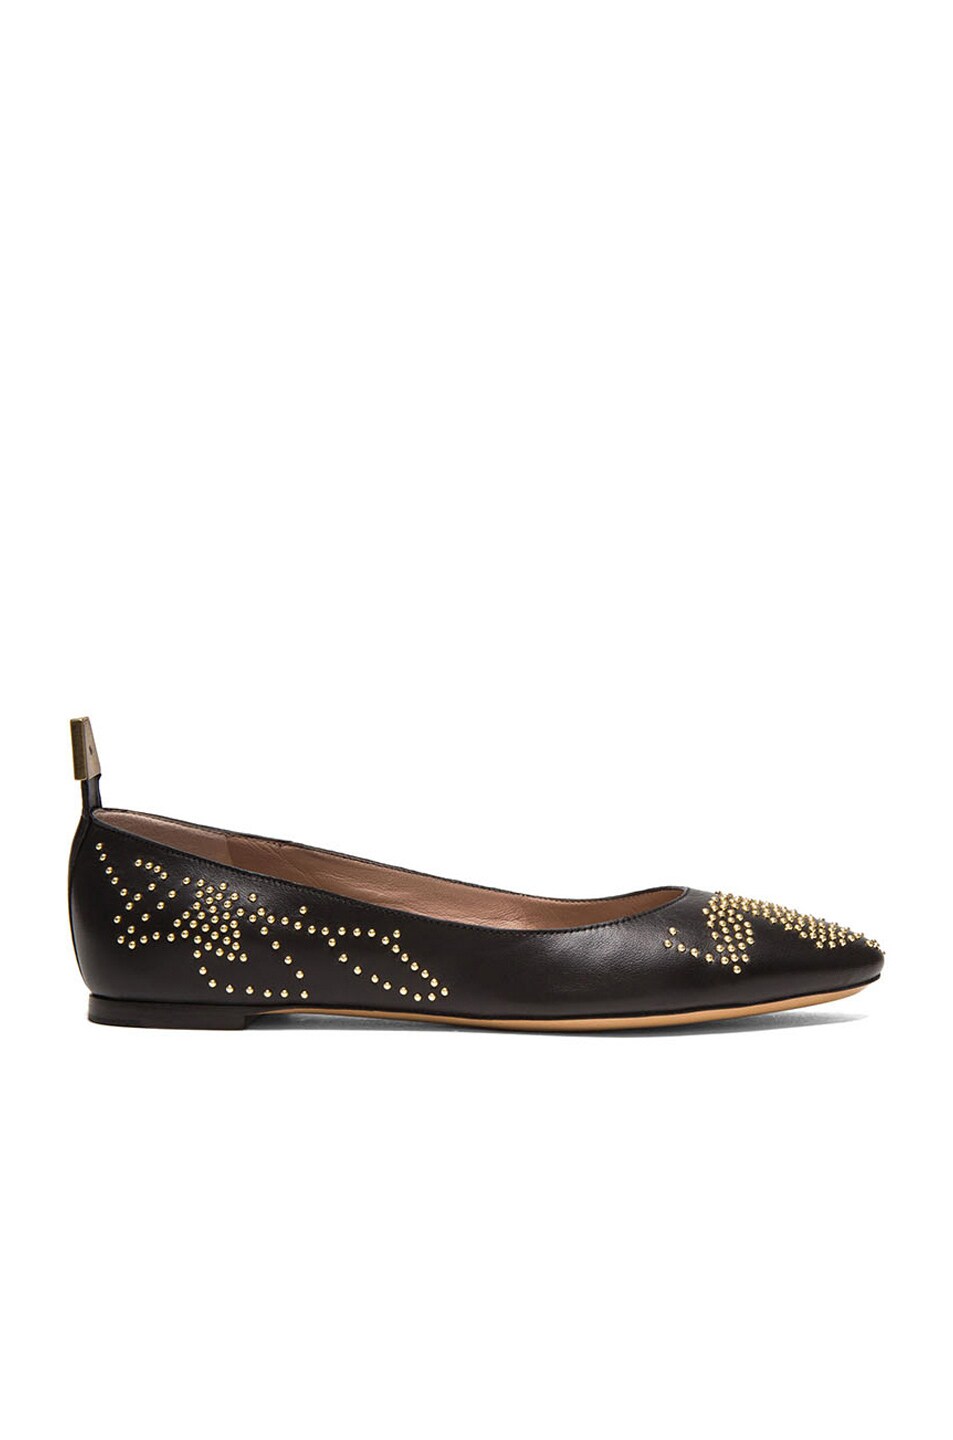 Image 1 of Chloe Studded Leather Flats in Black